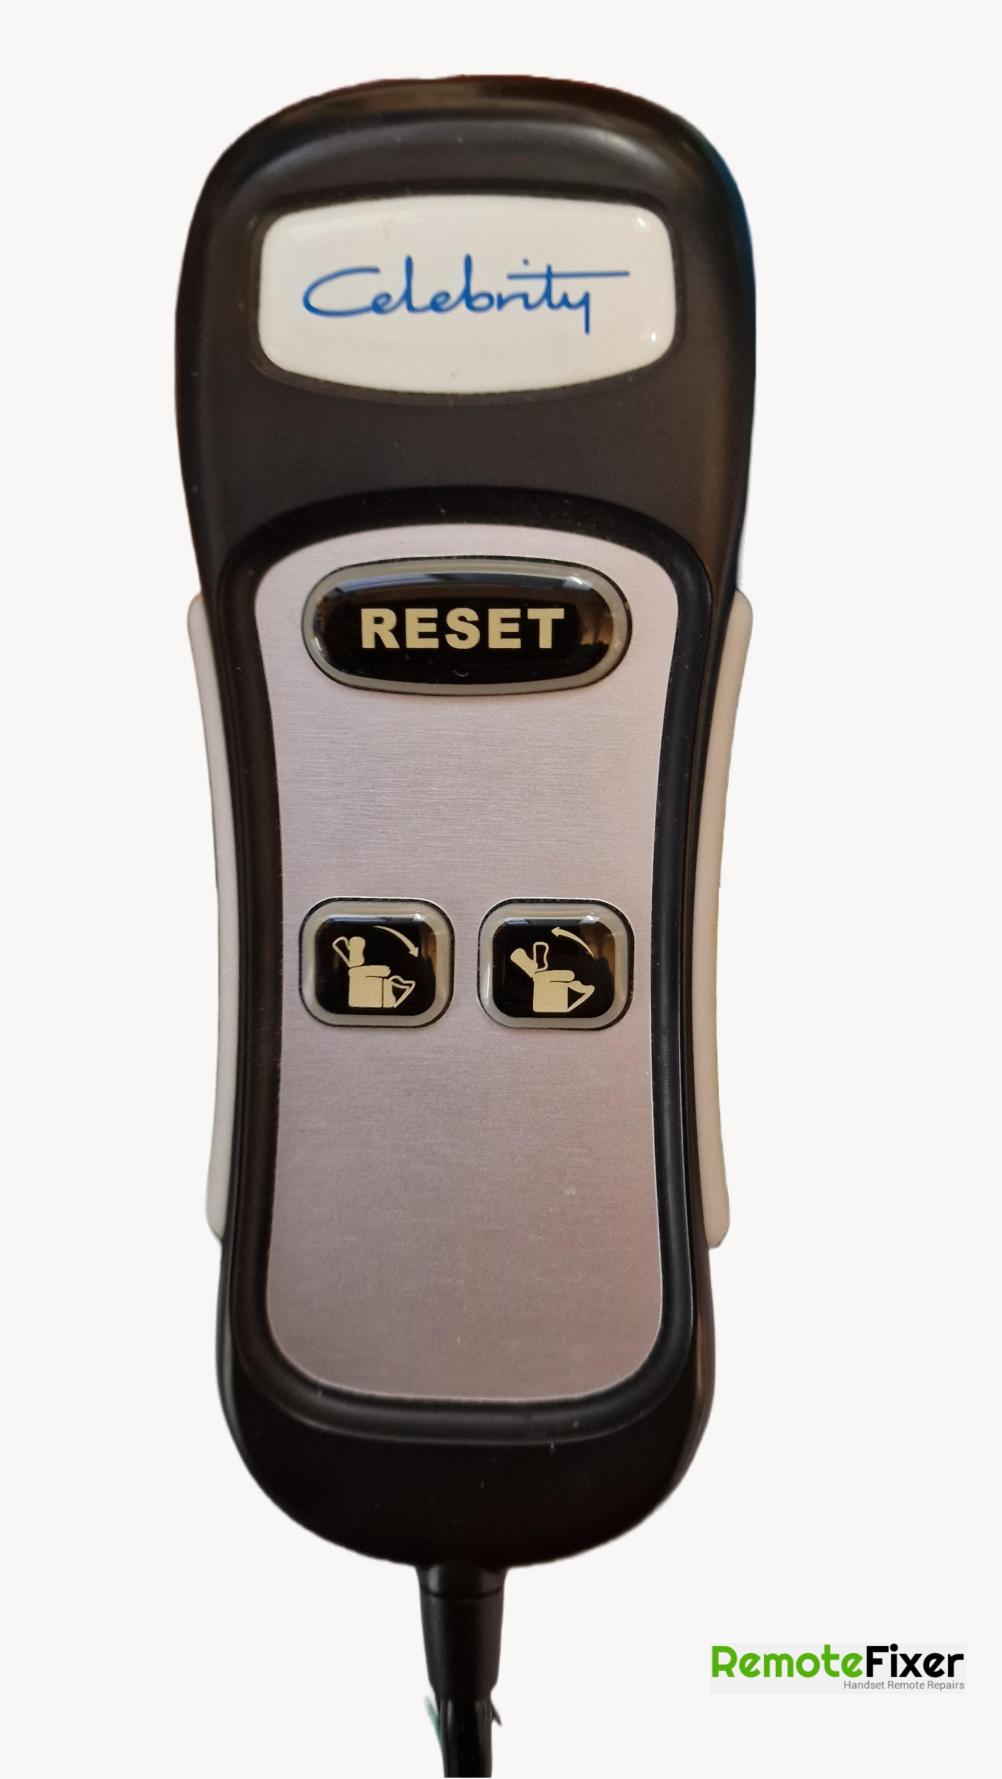 Celebrity - 8 Pin  Remote Control - Front Image